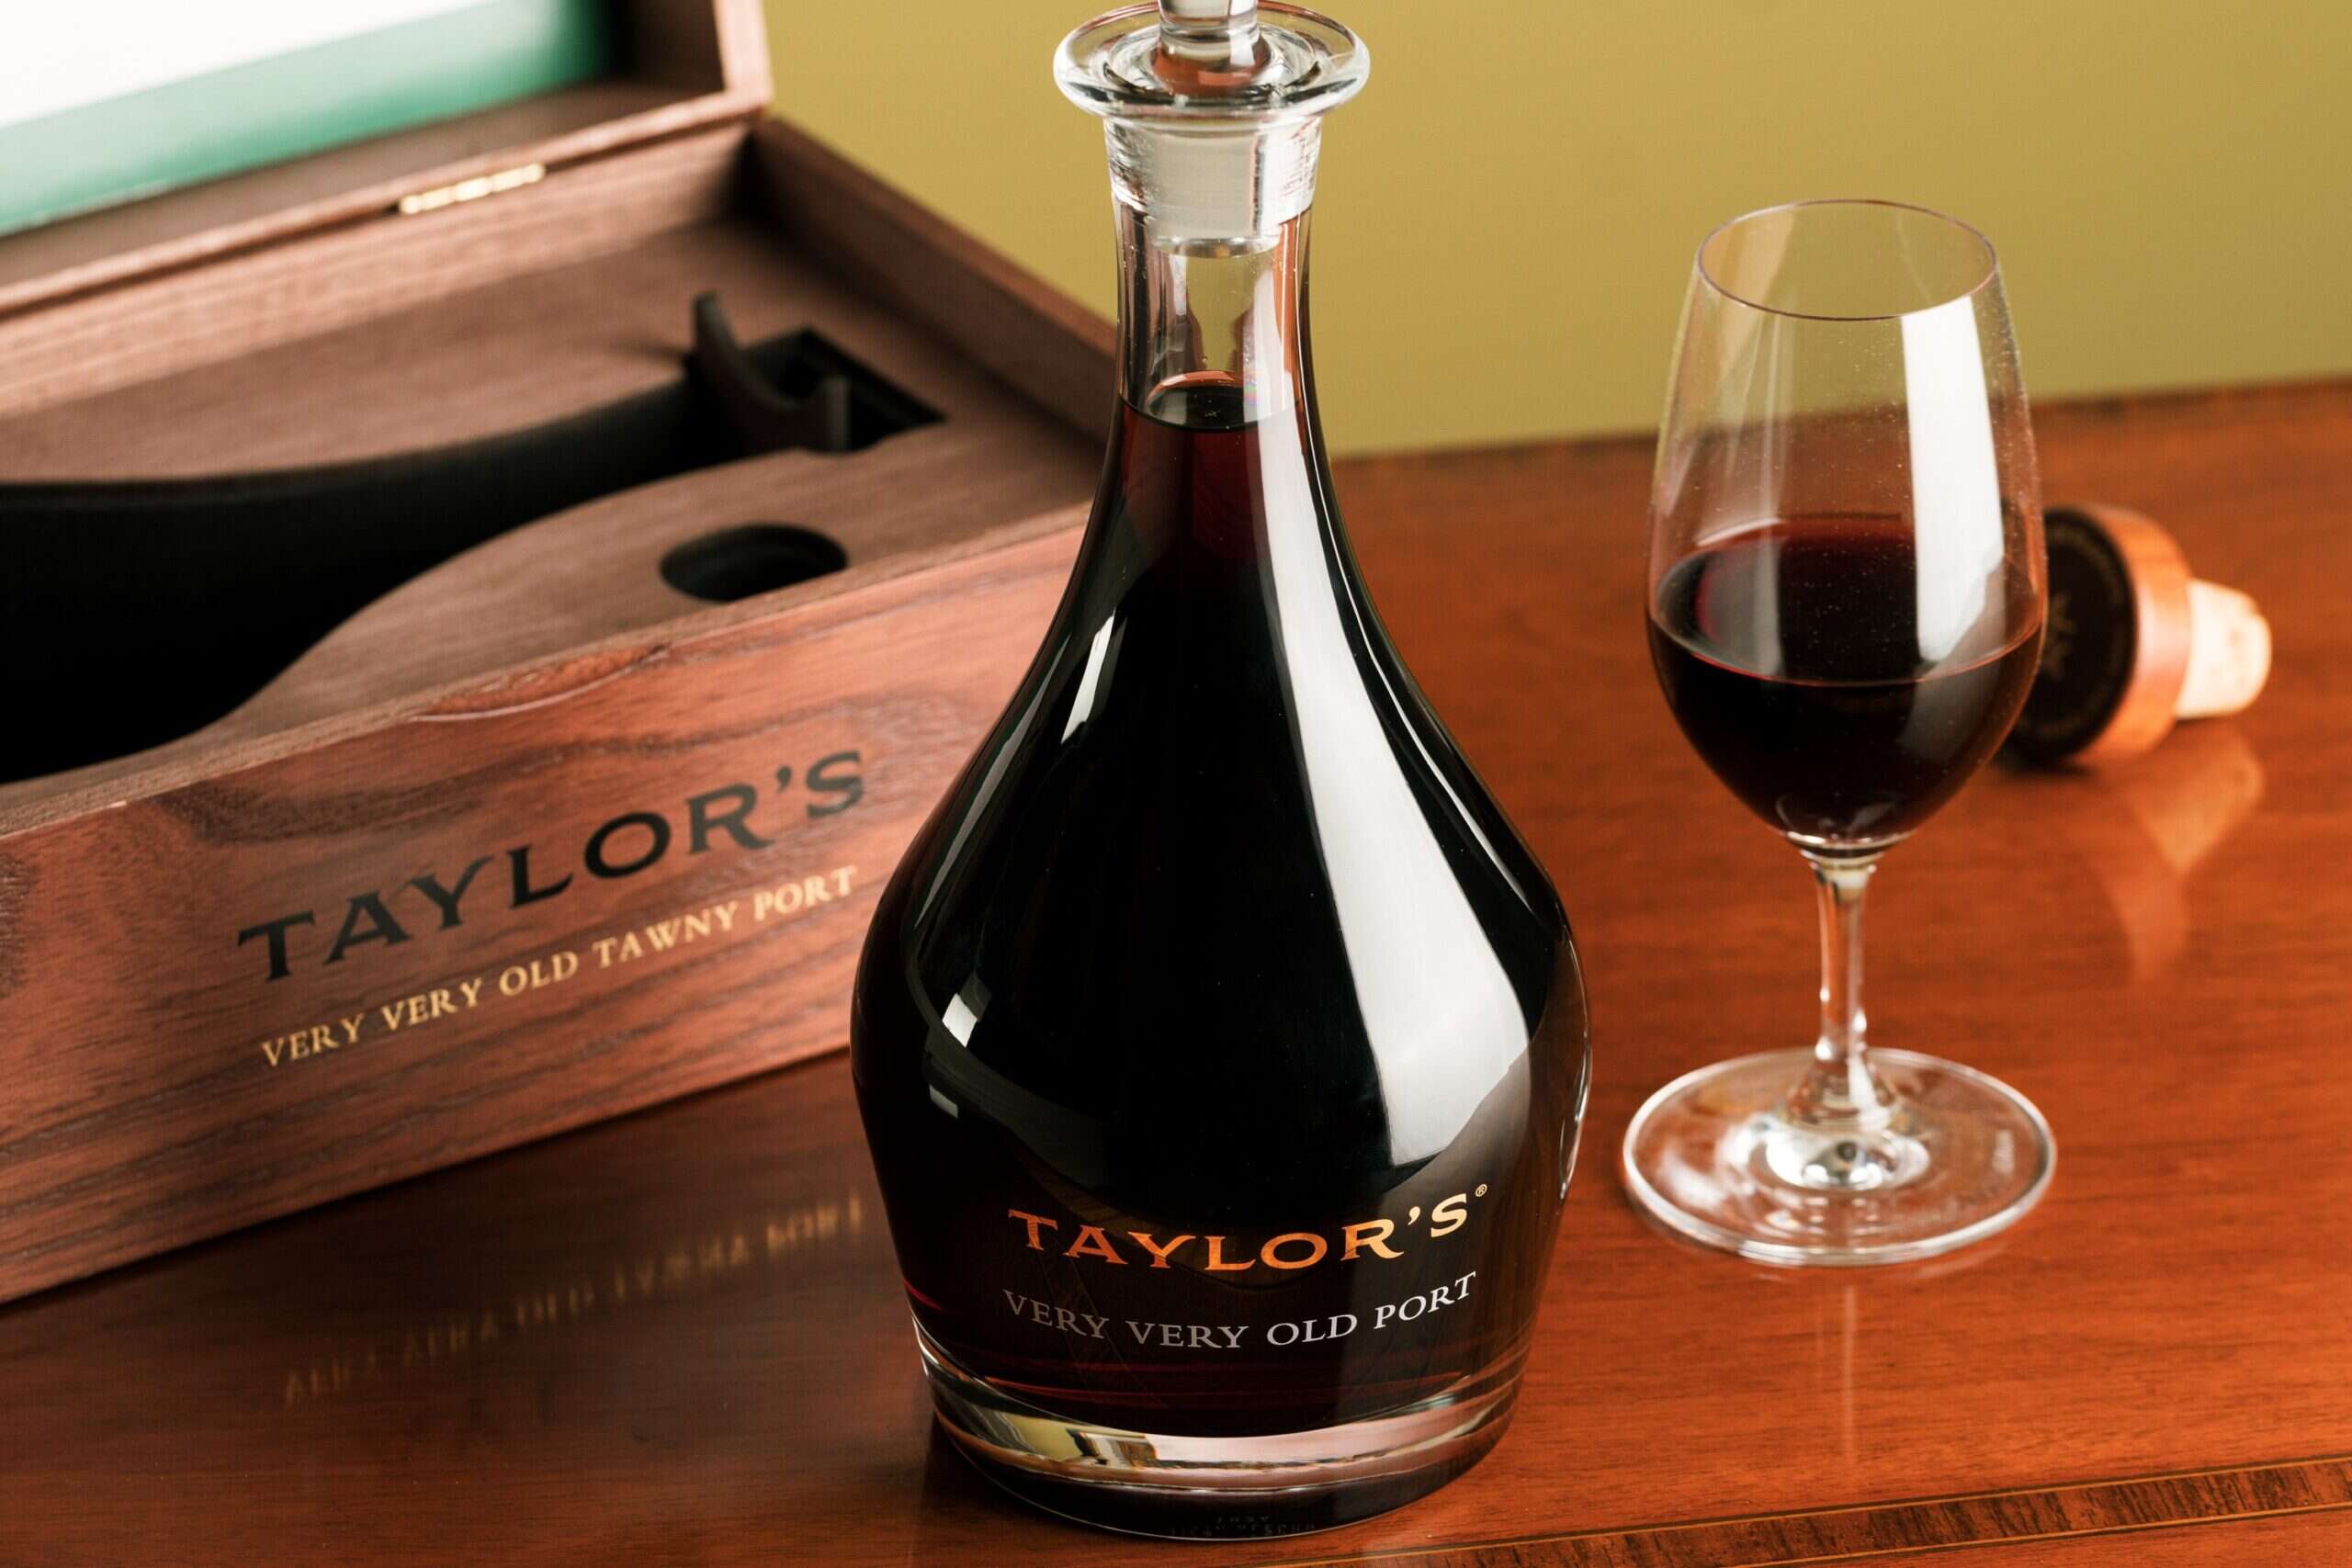 Taylor’s Very Very Old Port: A masterpiece of cask ageing